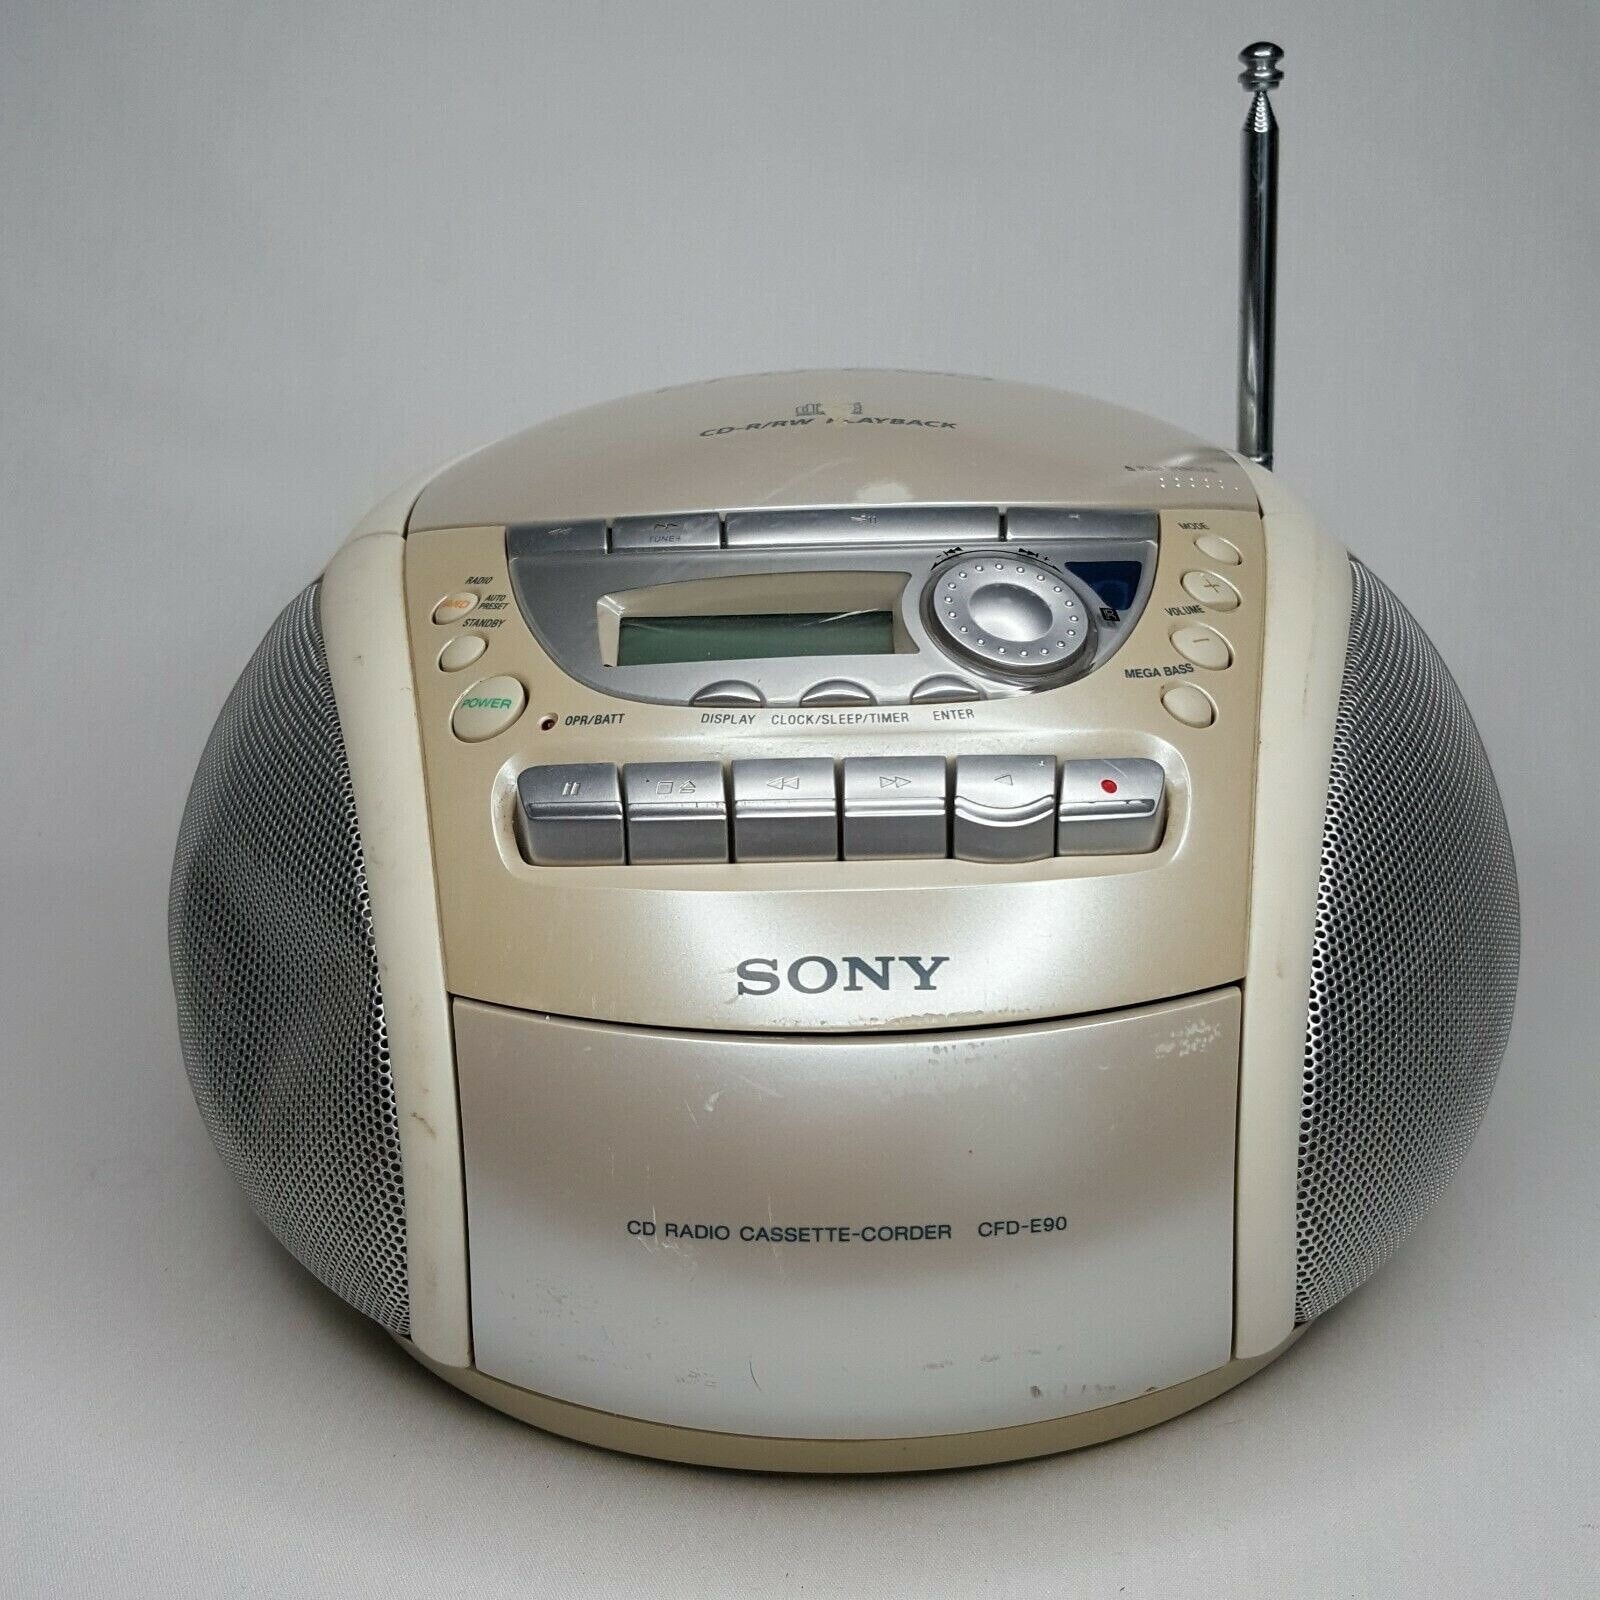 Sony CFD-E90 CD Radio Cassette Player Portable Boombox